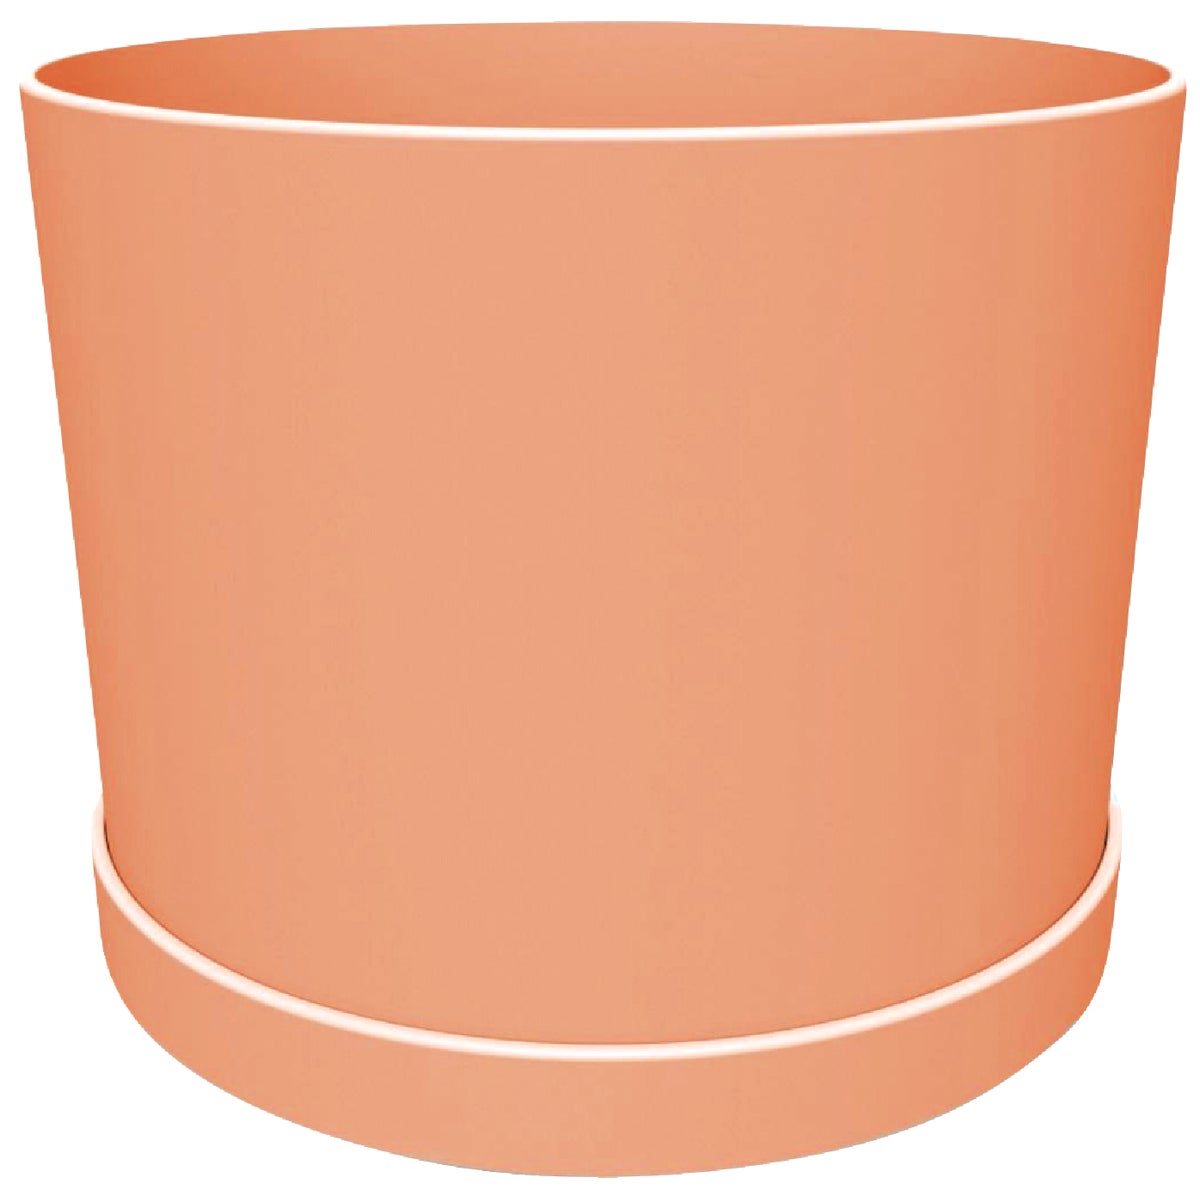 Bloem Mathers Collection 6 In. Muted Terra Cotta Plastic Planter